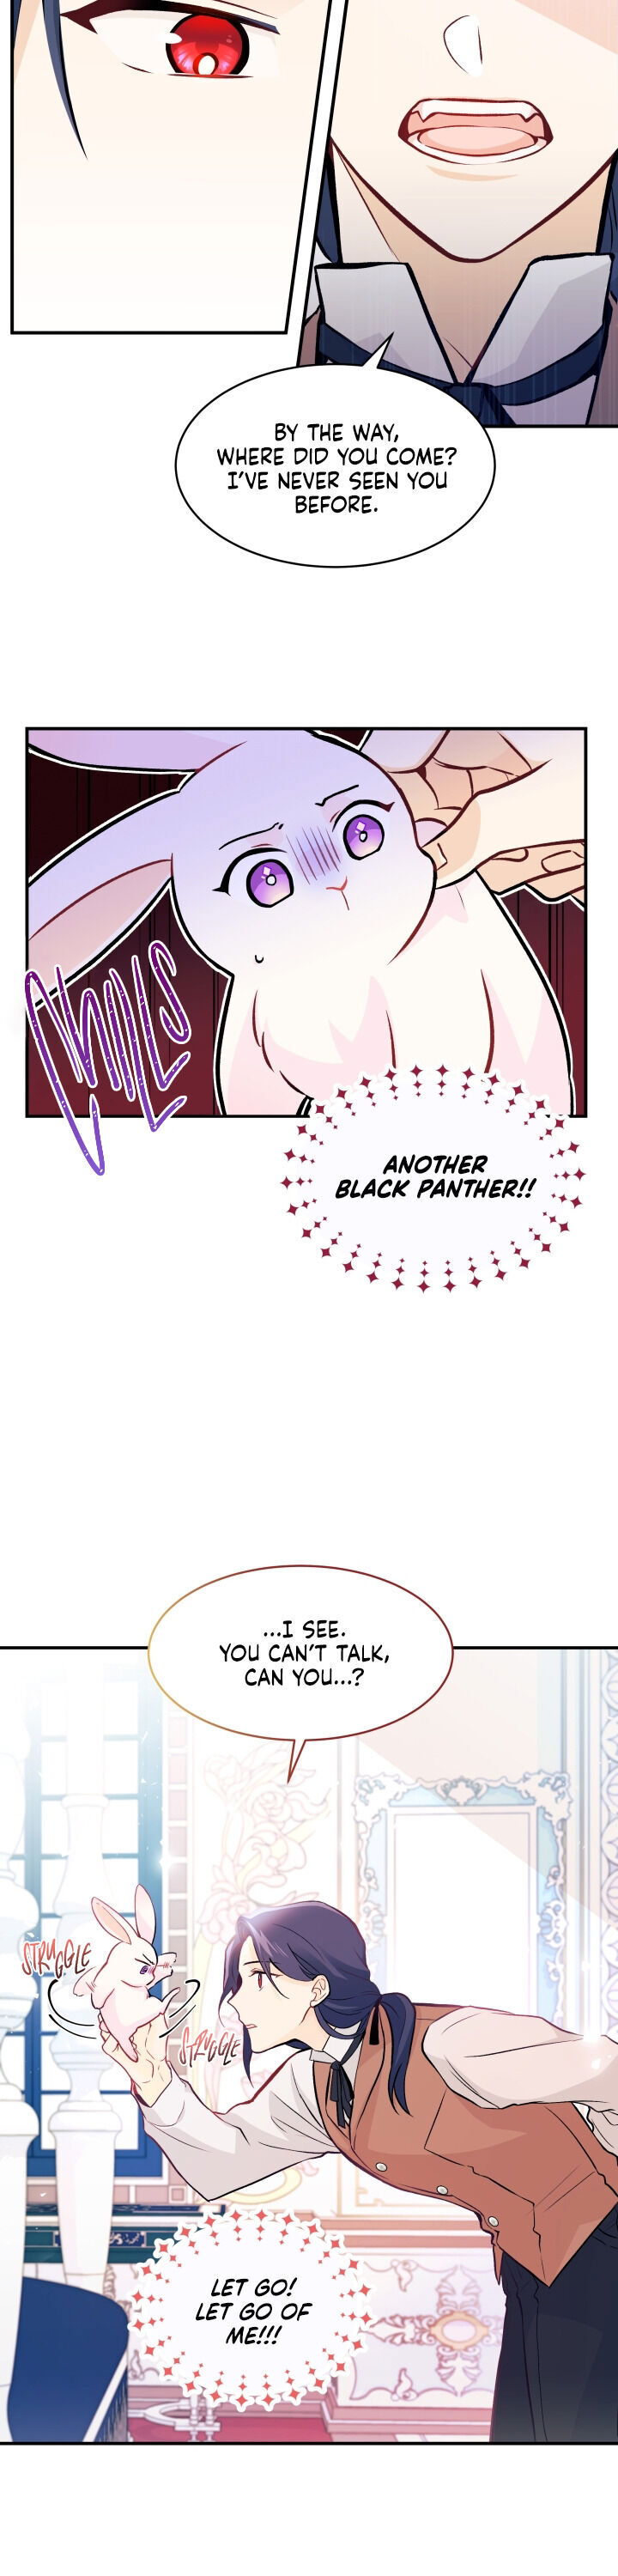 the-symbiotic-relationship-between-a-rabbit-and-a-black-panther-chap-2-8